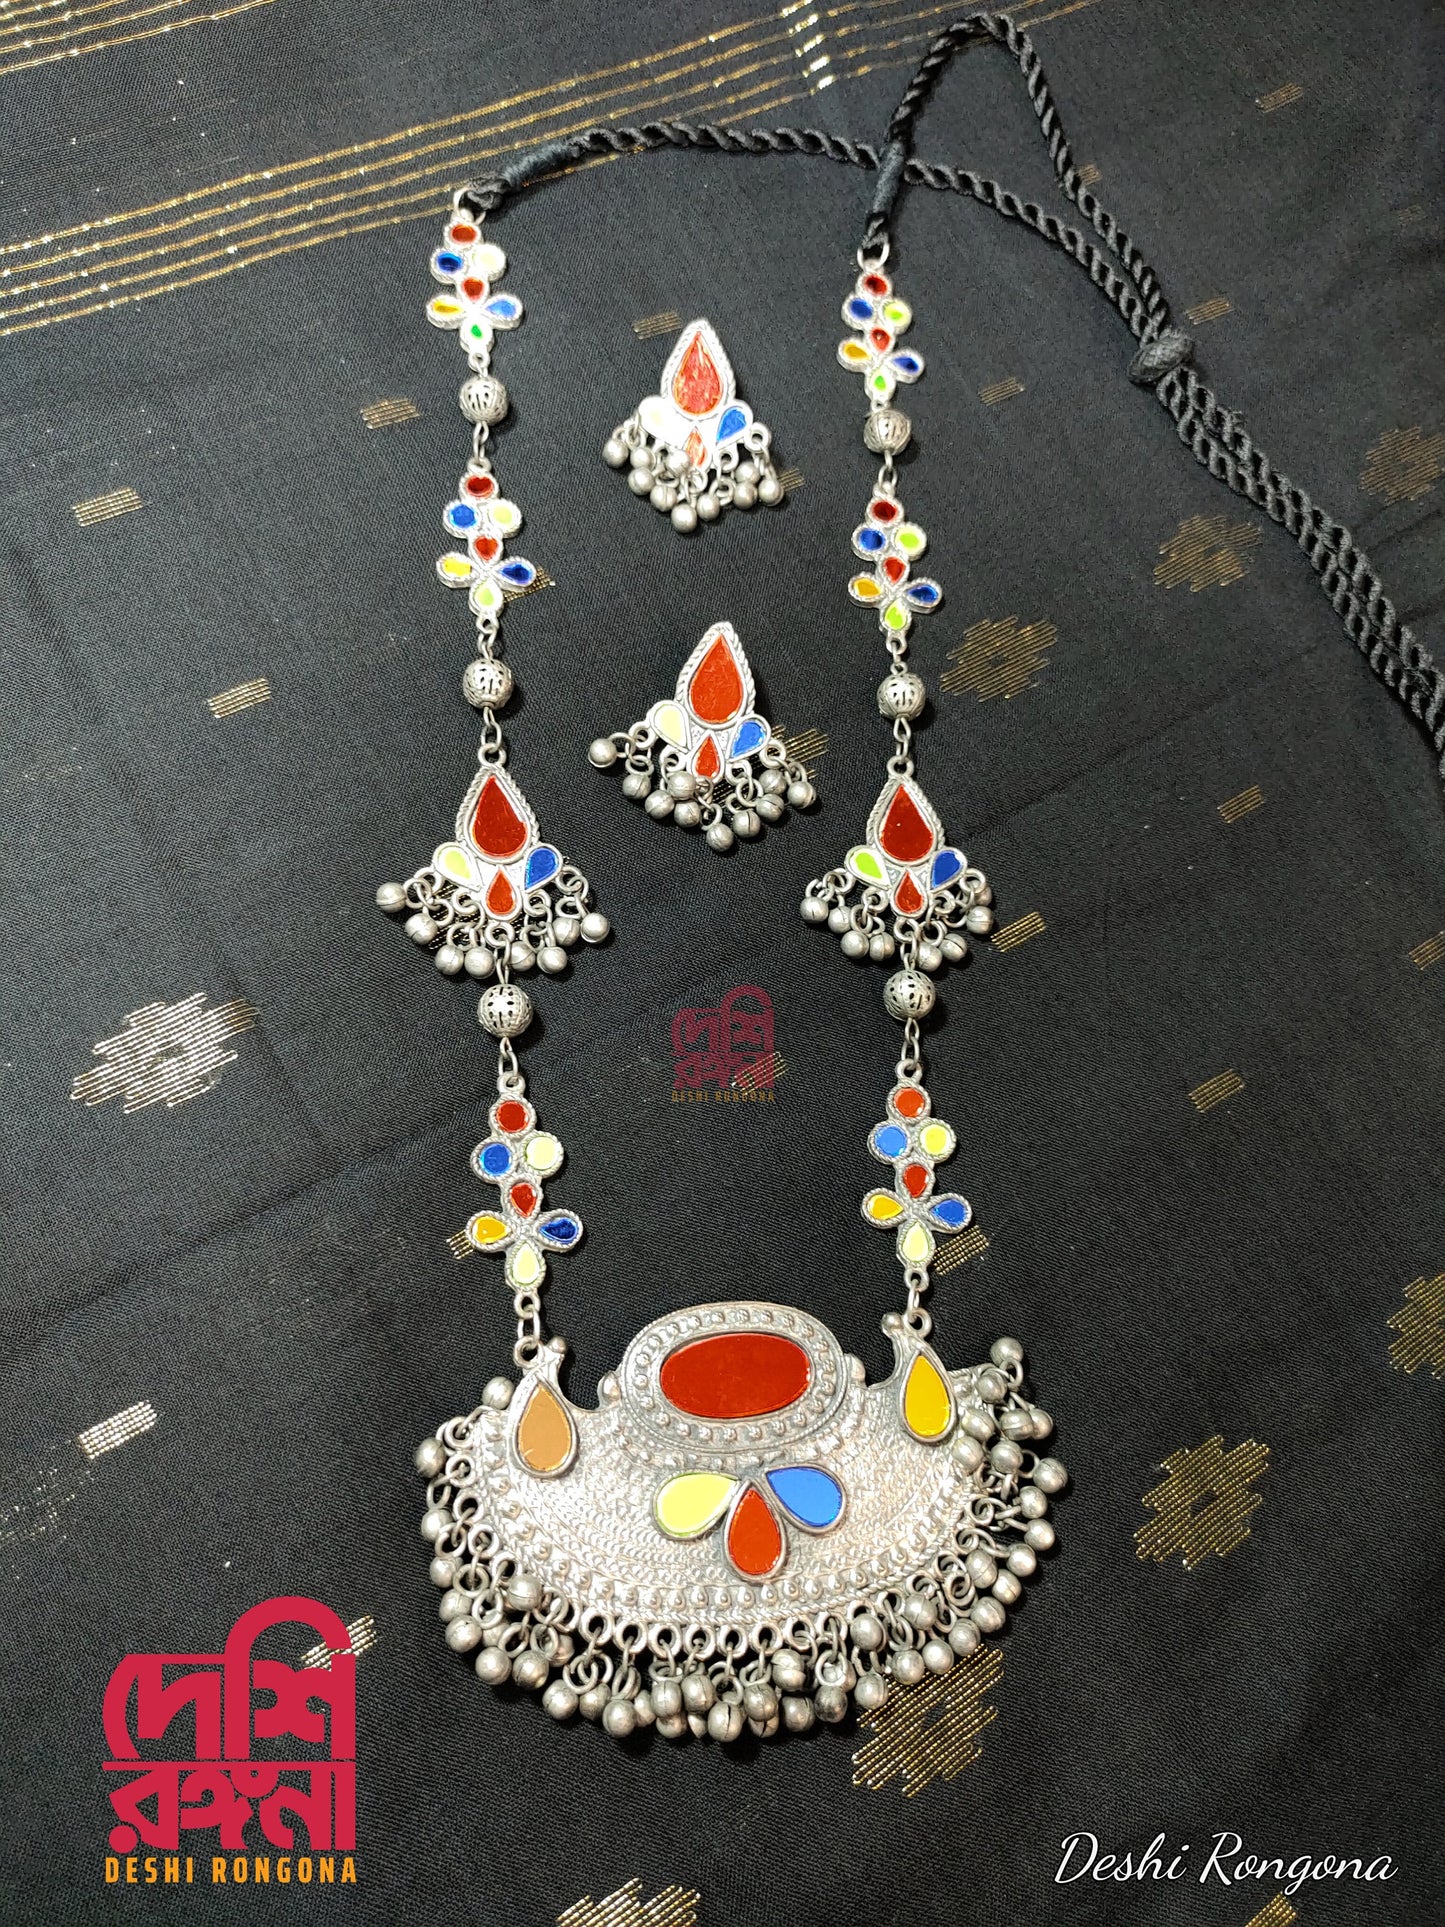 Silver Oxidised Mirror Jewelry, Antique Silver Plated Necklace,Jhumka Earrings,Indian Bollywood Jewelry,Fashion Set, Afgan/Bohemian Jewelry